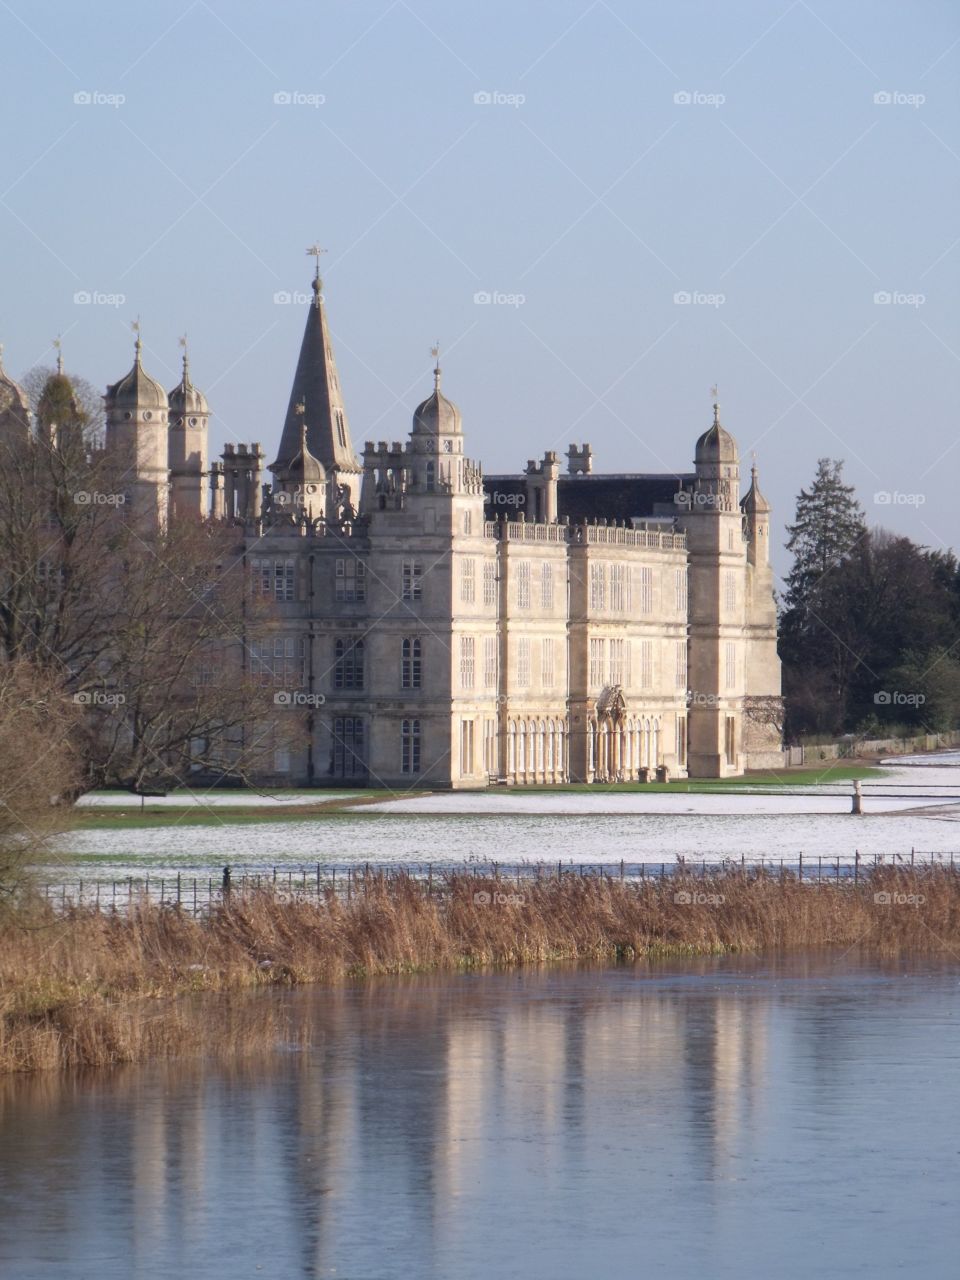 Burghley house Stamford Lincolnshire uk in snow